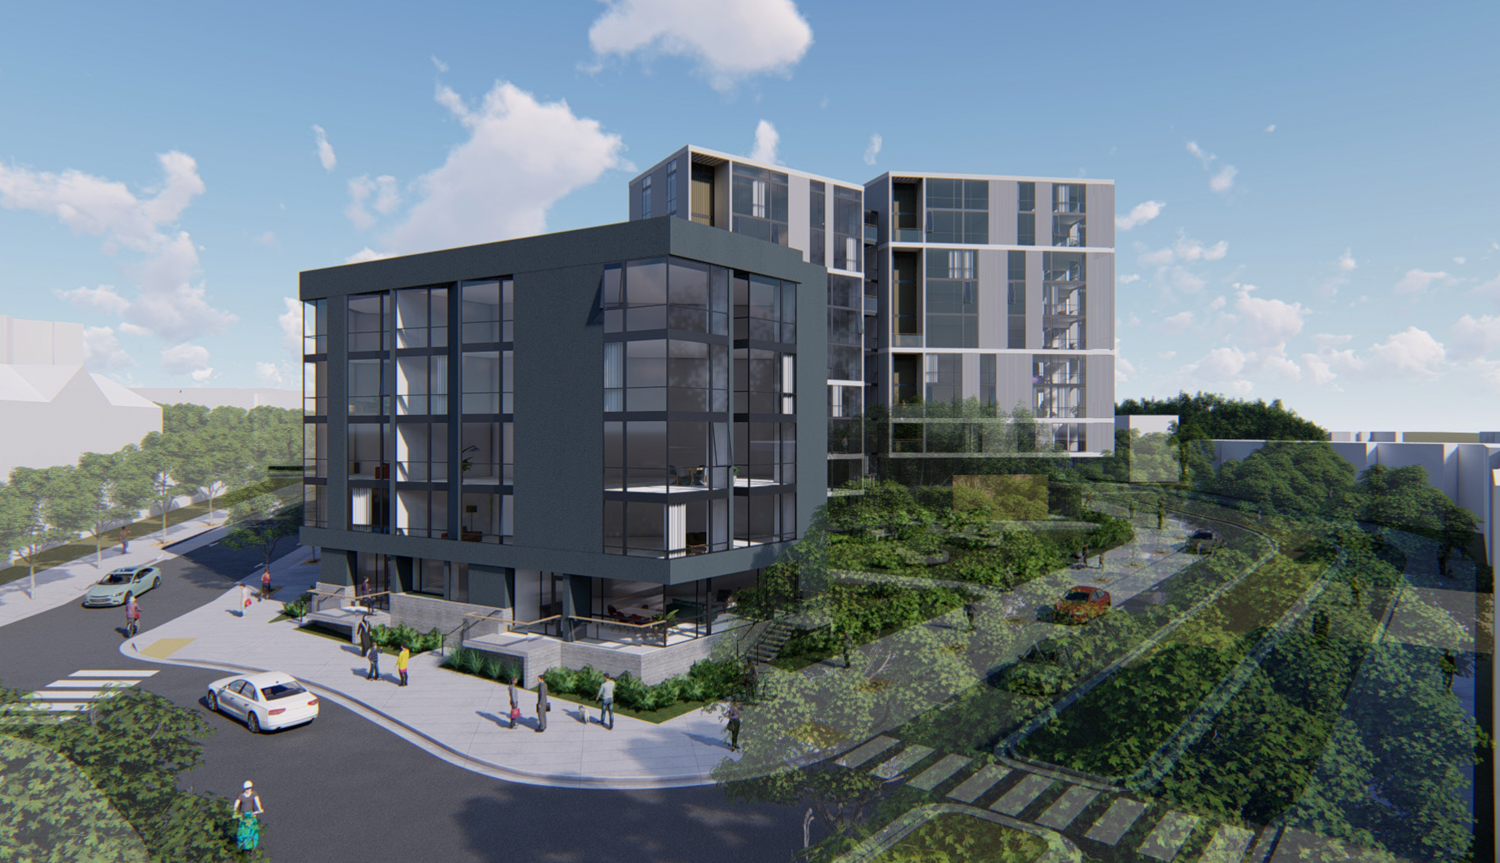 600 Arballo Drive from the corner of Garces and Vidal, rendering by Kennerly Architecture